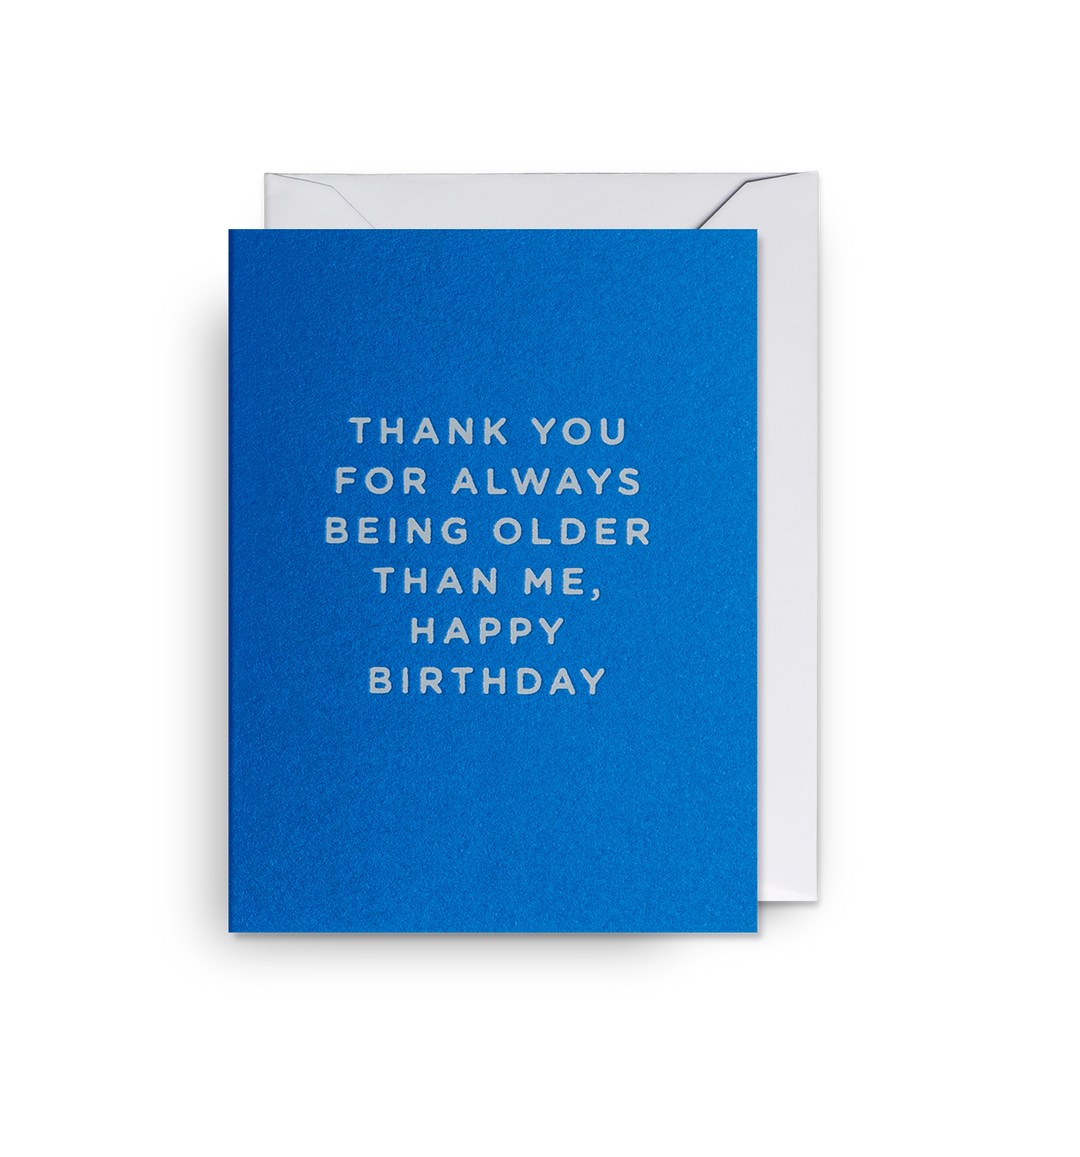 Thank you for Always Being Older - Mini Card